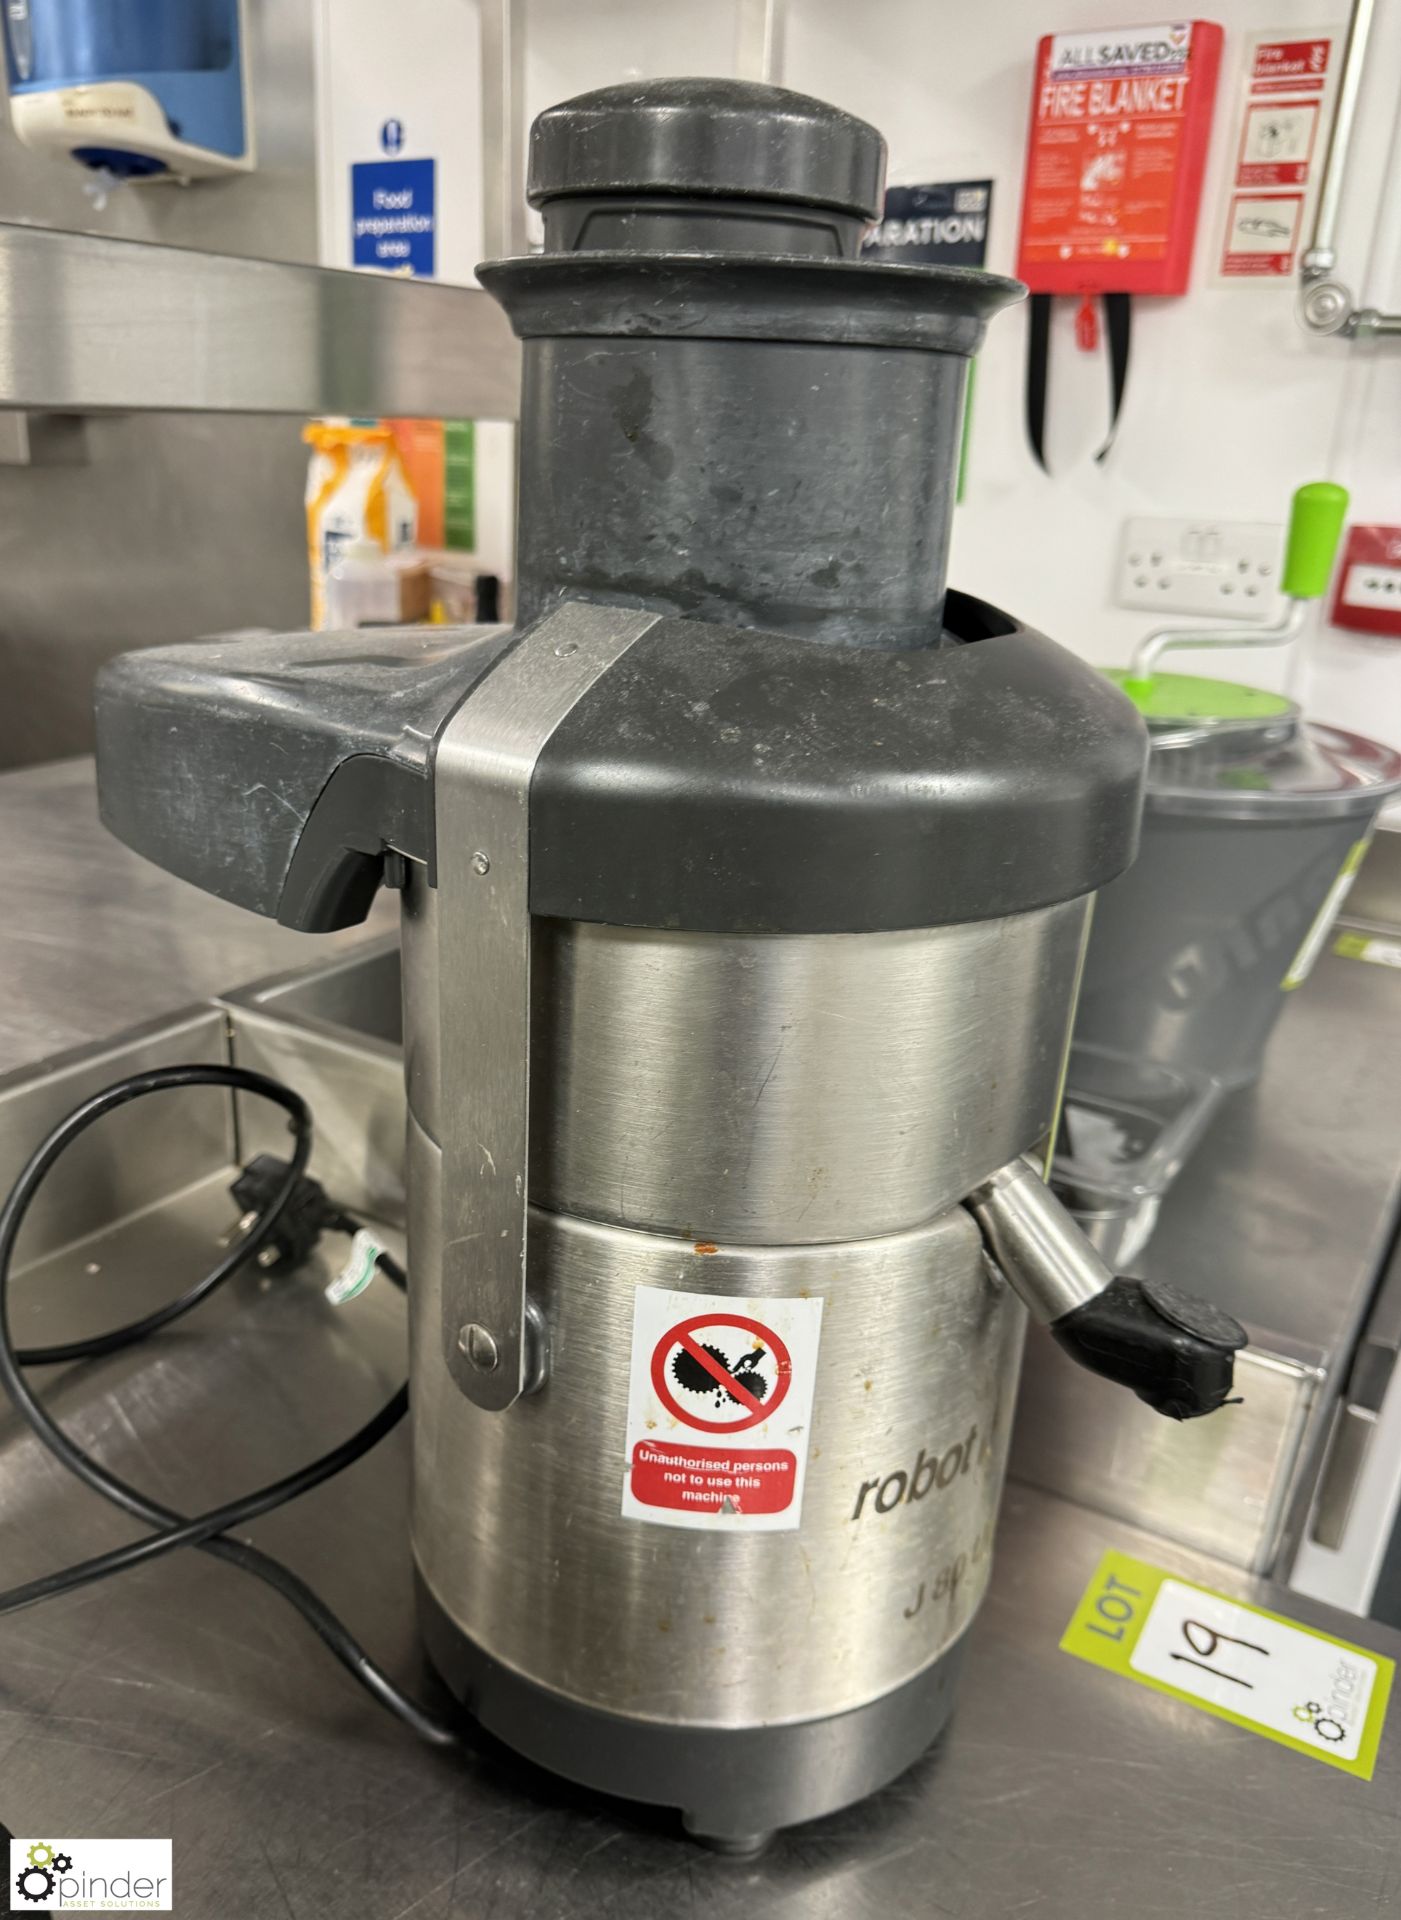 Robot Coupe J80 Buffet Juicer, 240volts (location in building – basement kitchen 1) - Image 3 of 4